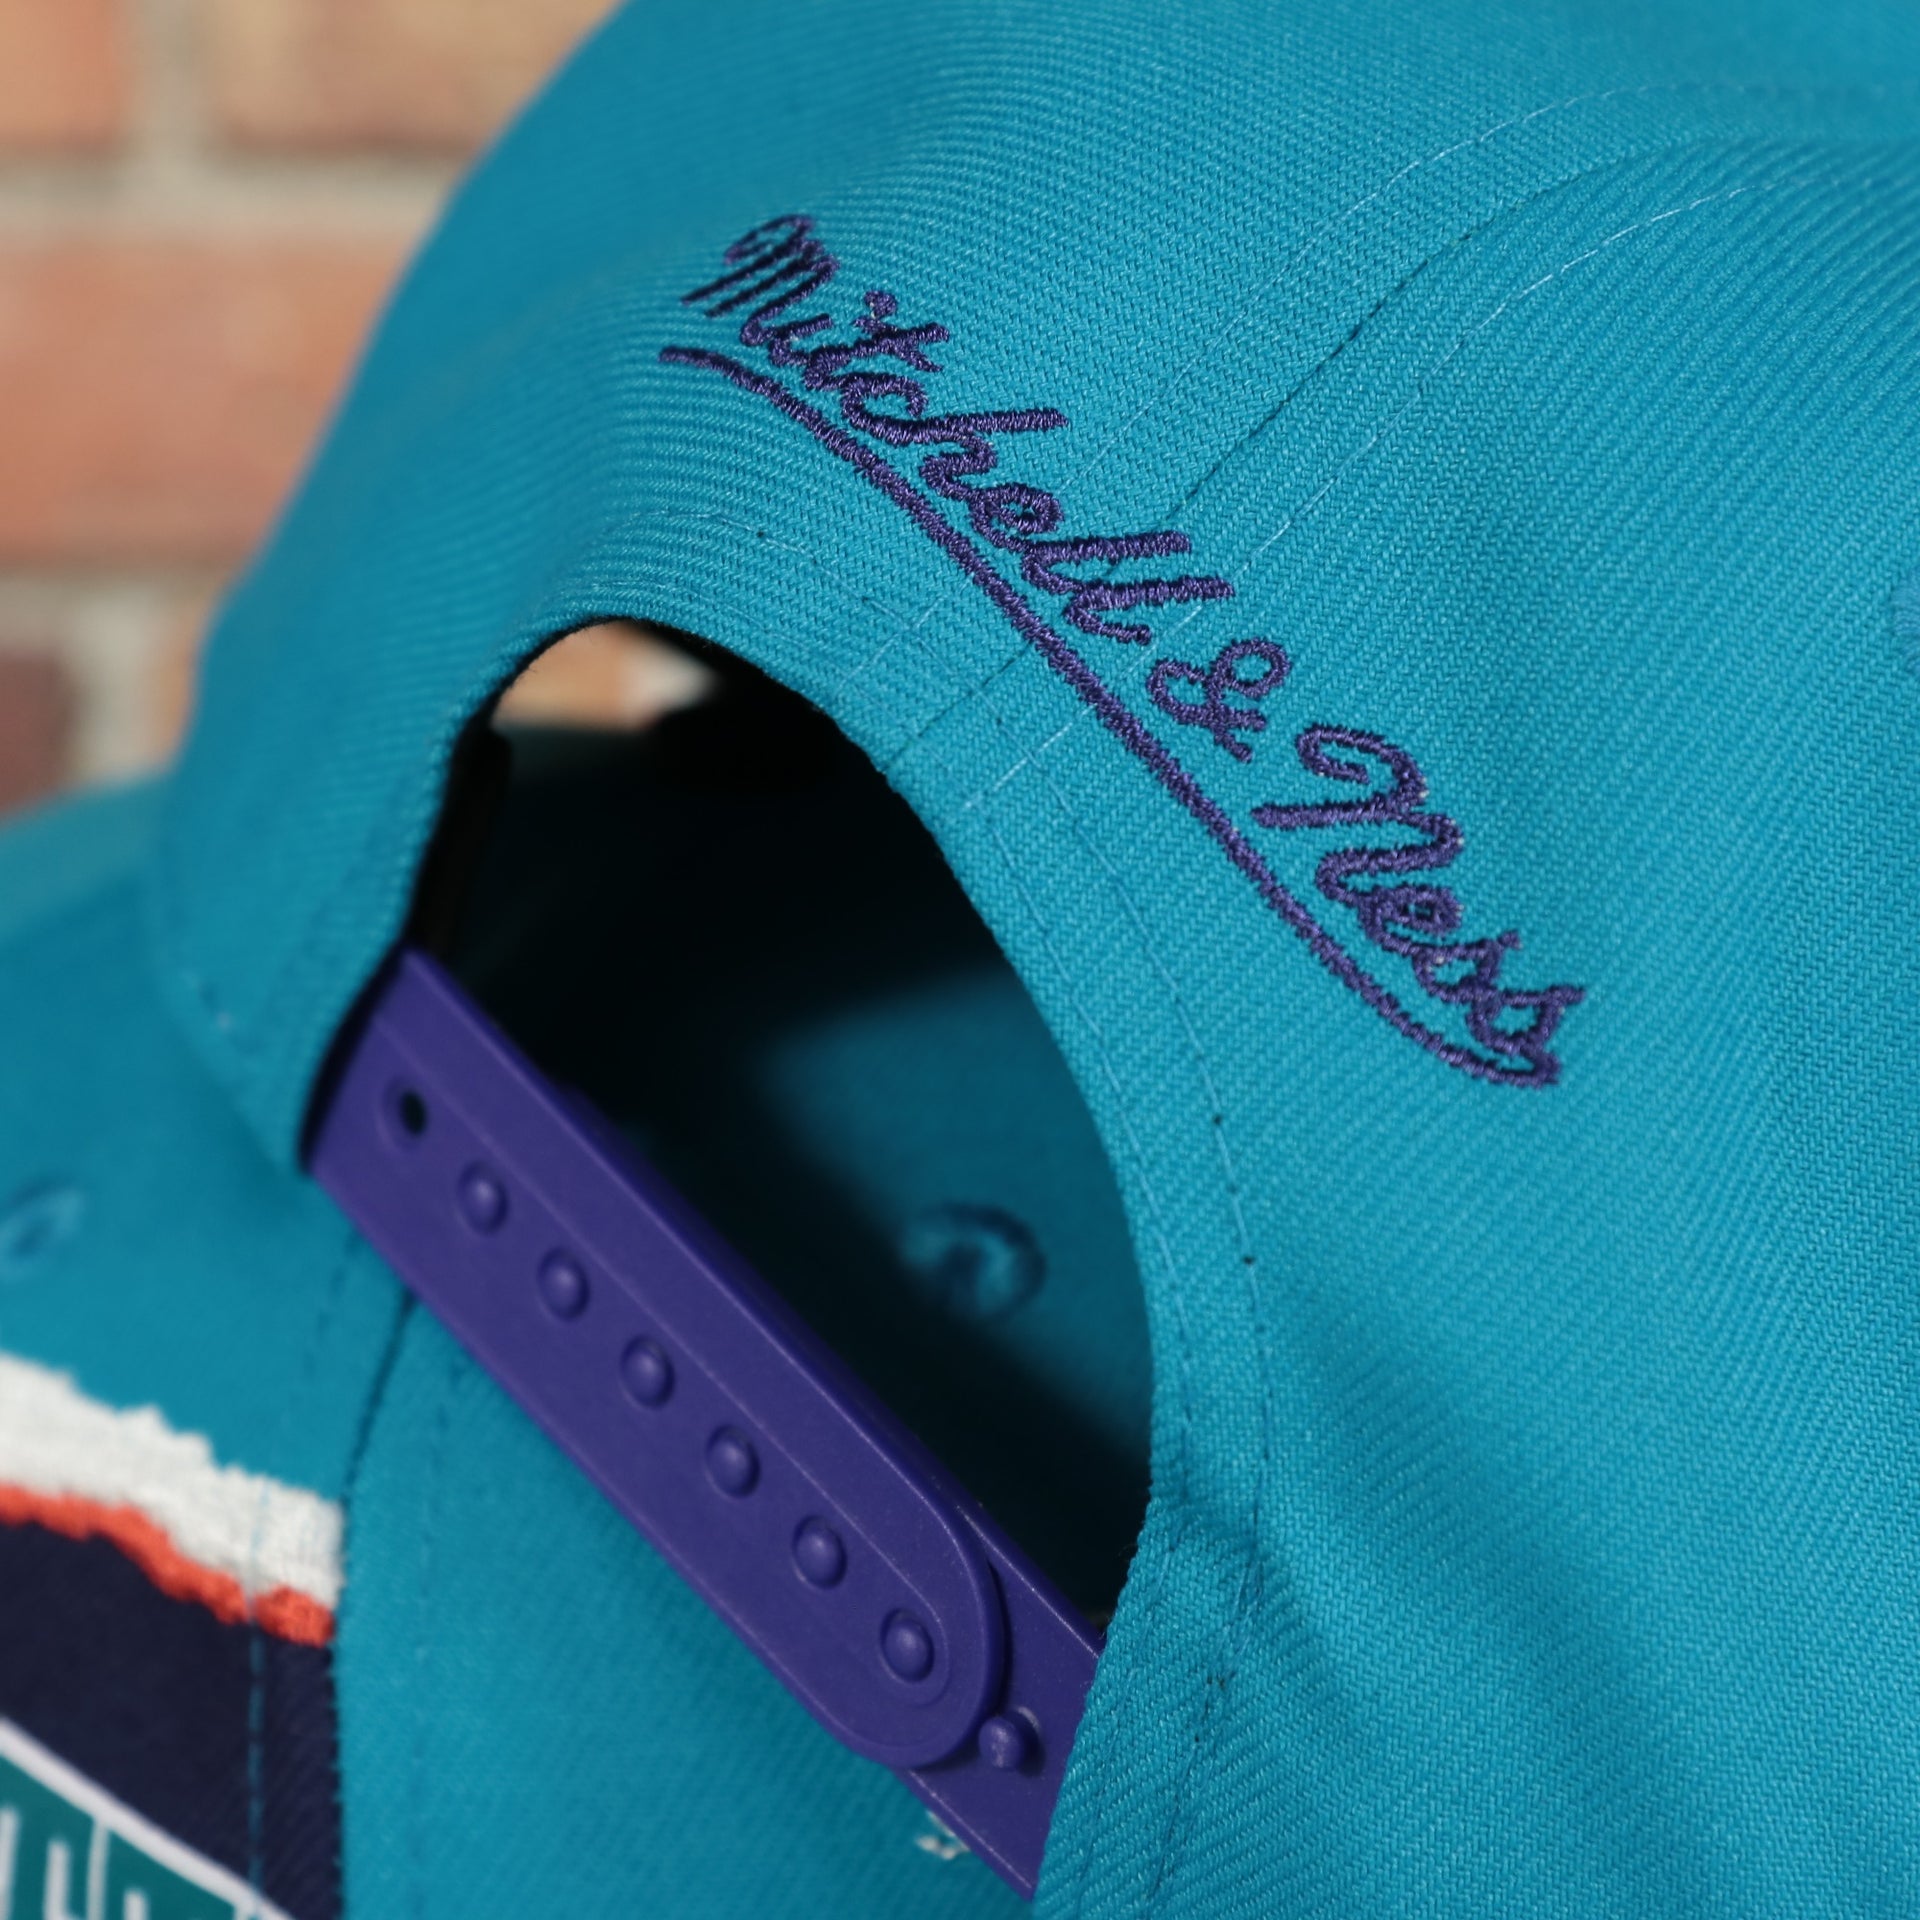 mitchell and ness logo on the Charlotte Hornets Hardwood Classics Jumbotron "Charlotte" Ripped Wordmark side patch Grey Bottom Teal/Purple Snapback hat | Mitchell and Ness Two Tone Snap Cap